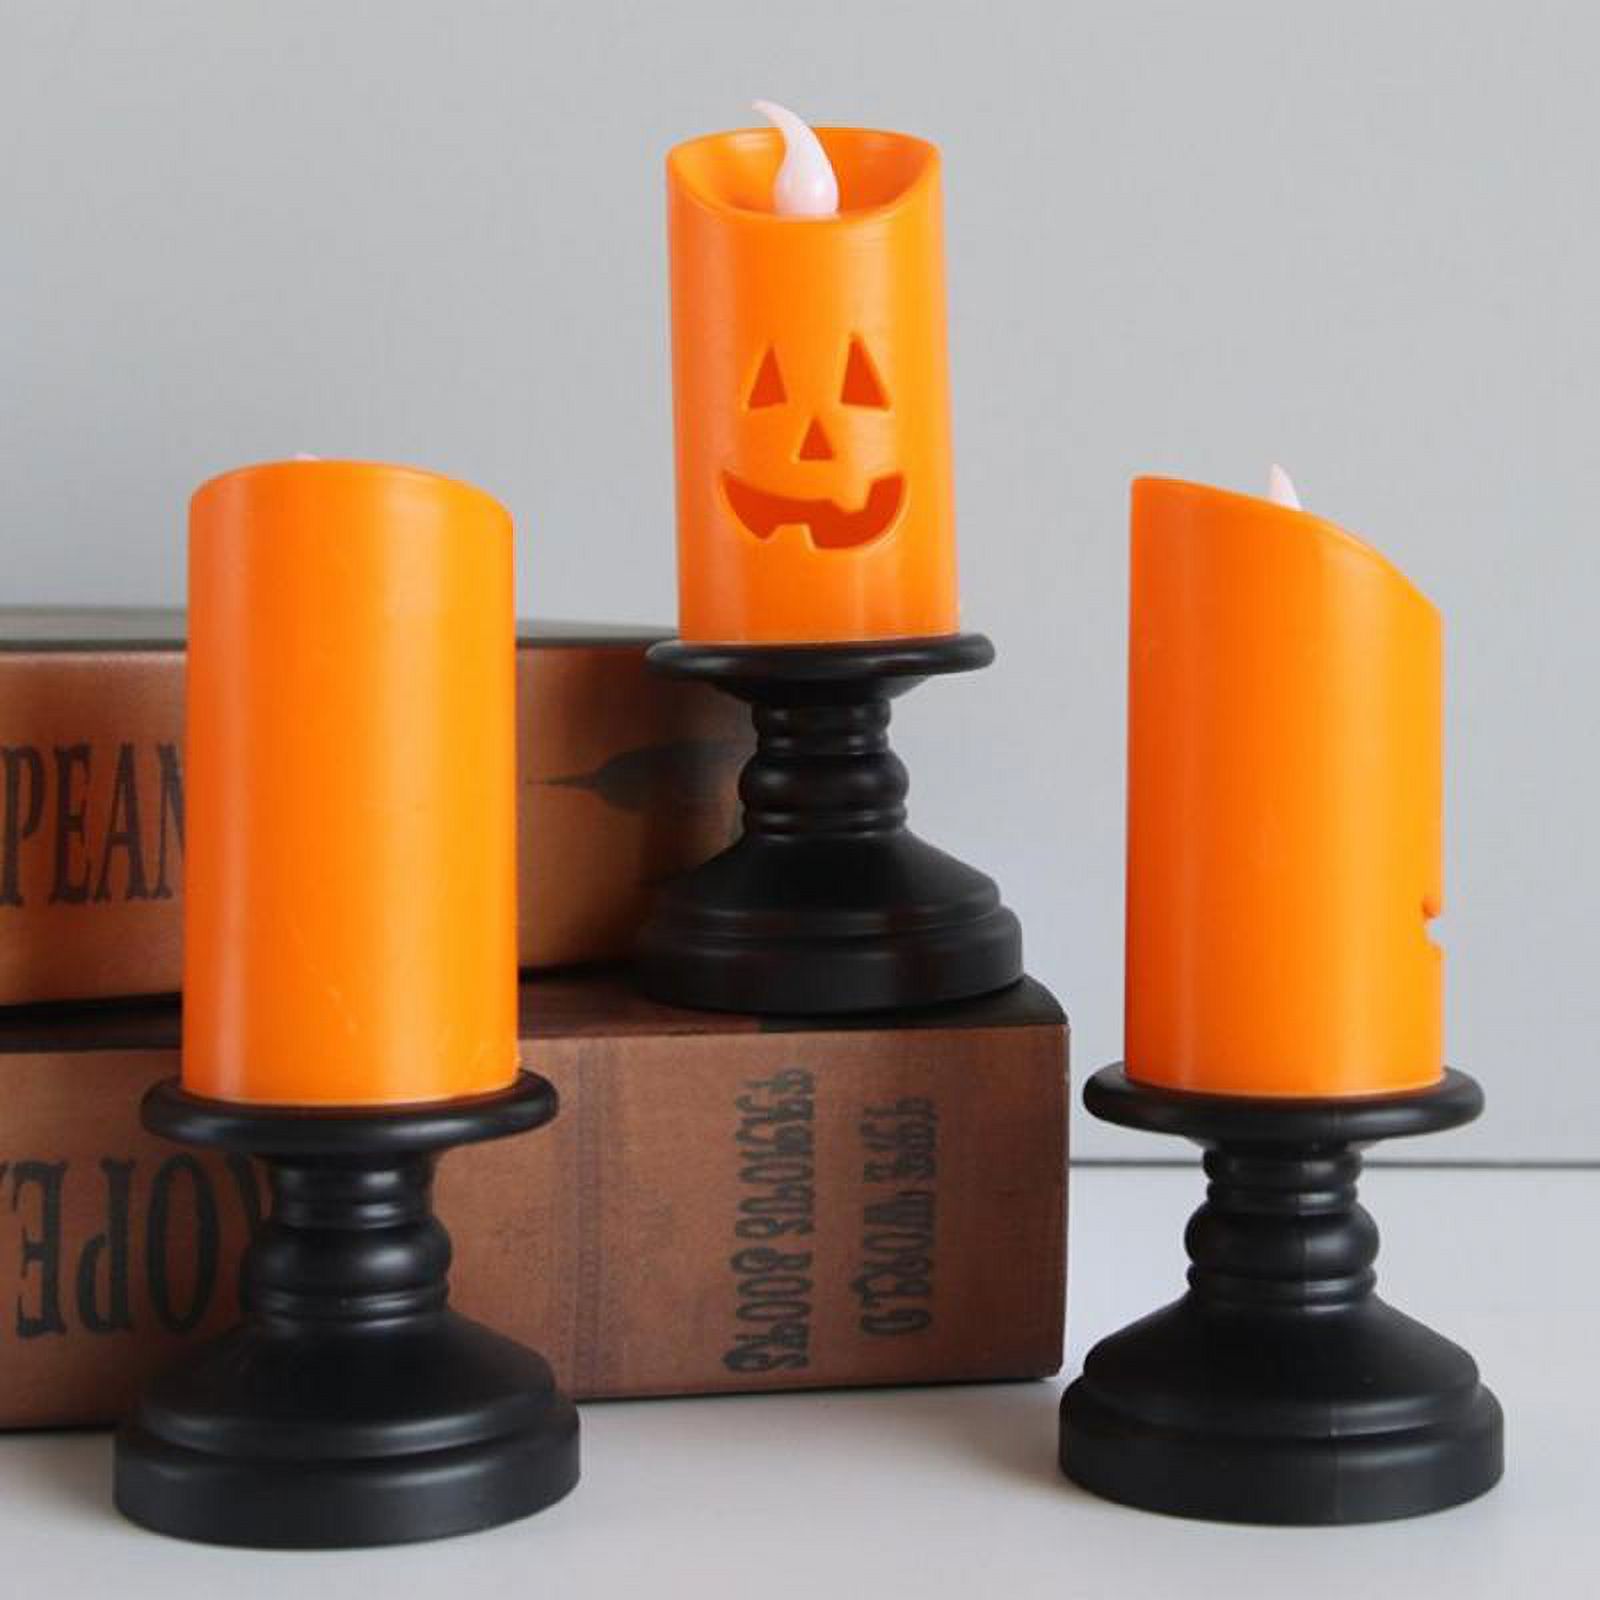 6 PACK Halloween Pumpkin Candle Light, Halloween Orange Flameless Candle Lights LED Lamps Festival Decor Light for Halloween Party - image 3 of 13